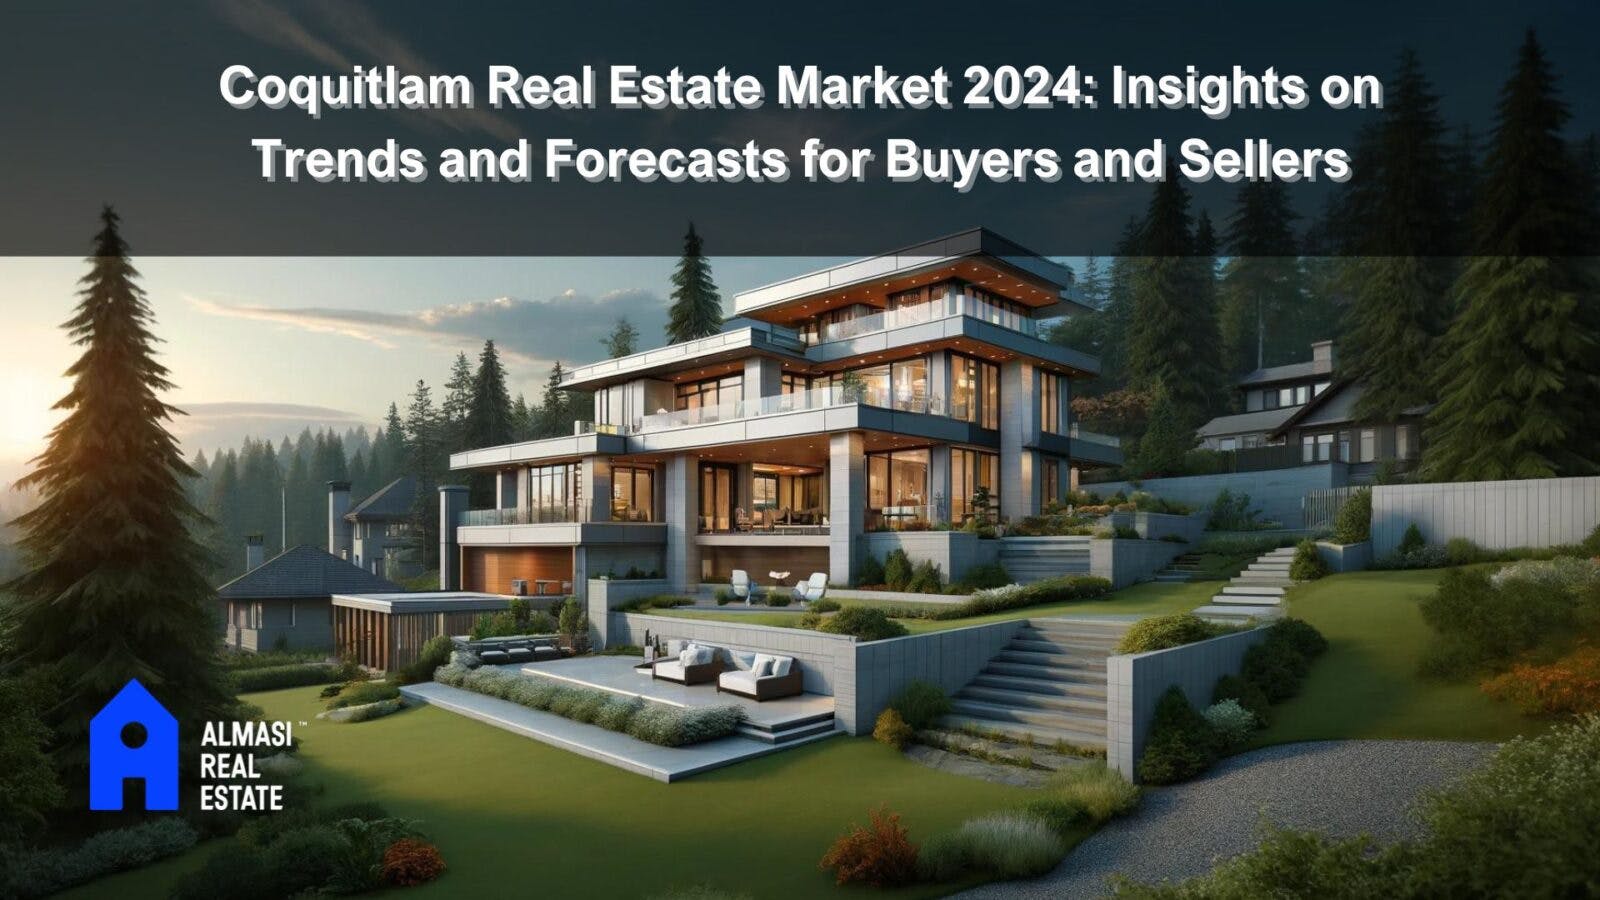 Coquitlam Real Estate Market 2024: Insights on Trends and Forecasts for Buyers and Sellers